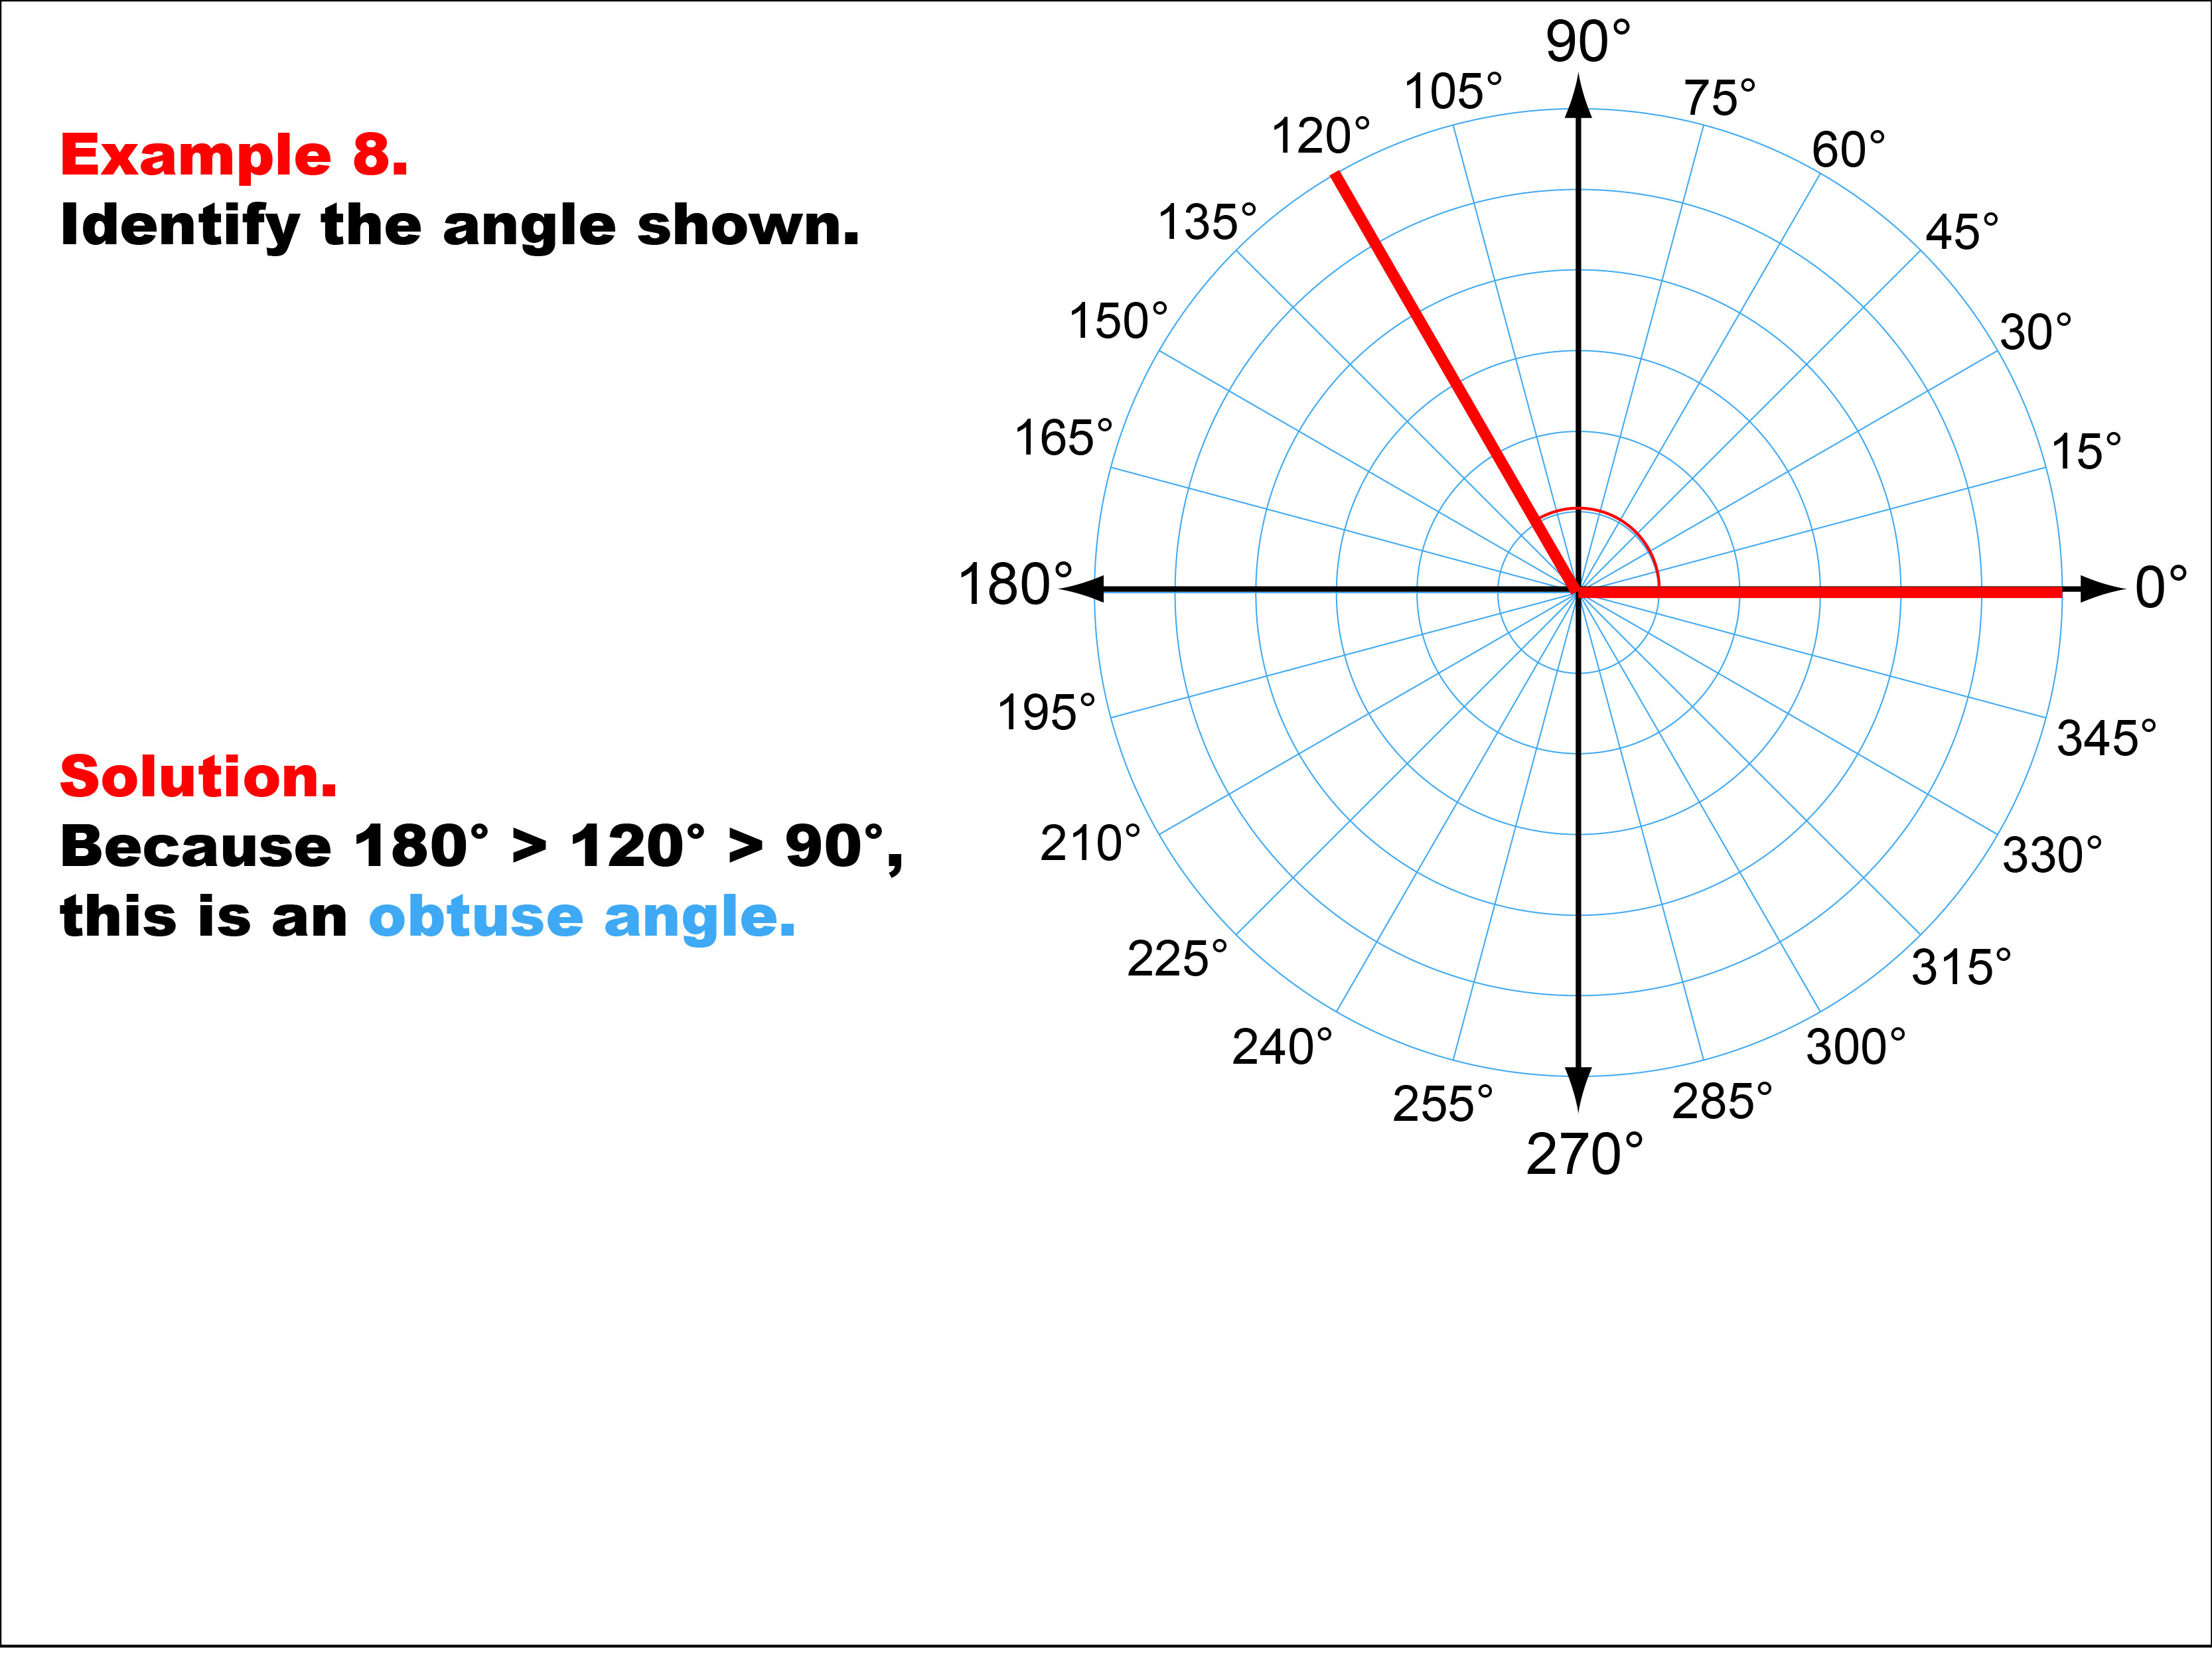 Angle Measures, Example 8: An angle measure of 120 degrees.